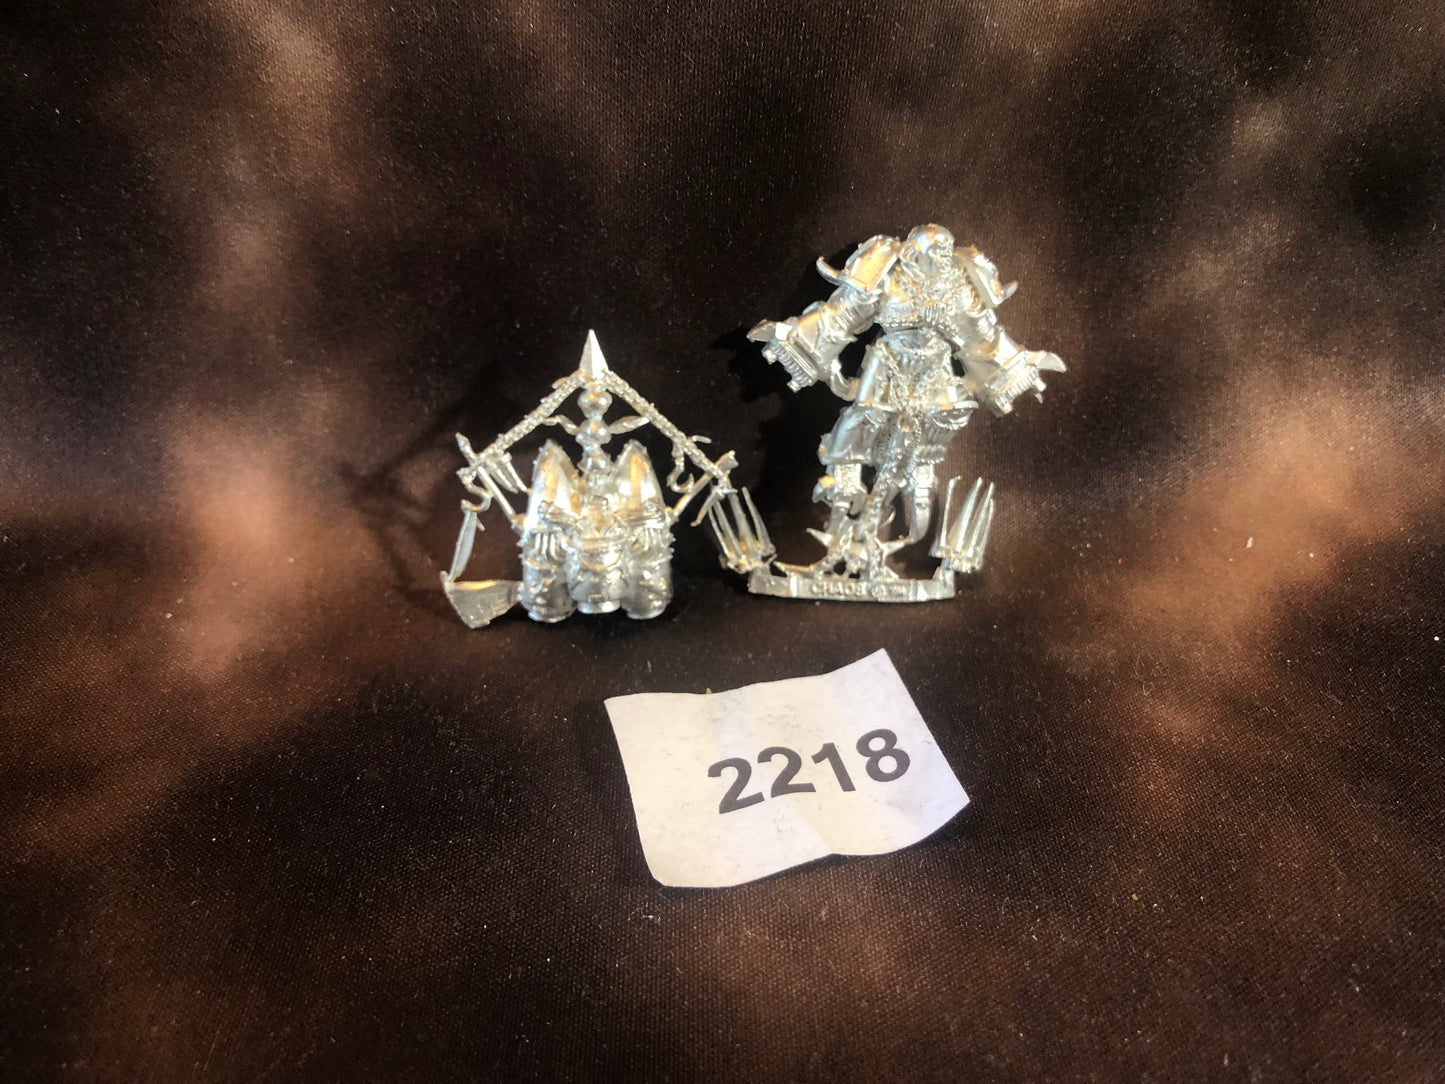 Warhammer 40k Chaos Space Marine Lord with Jump Pack Metal